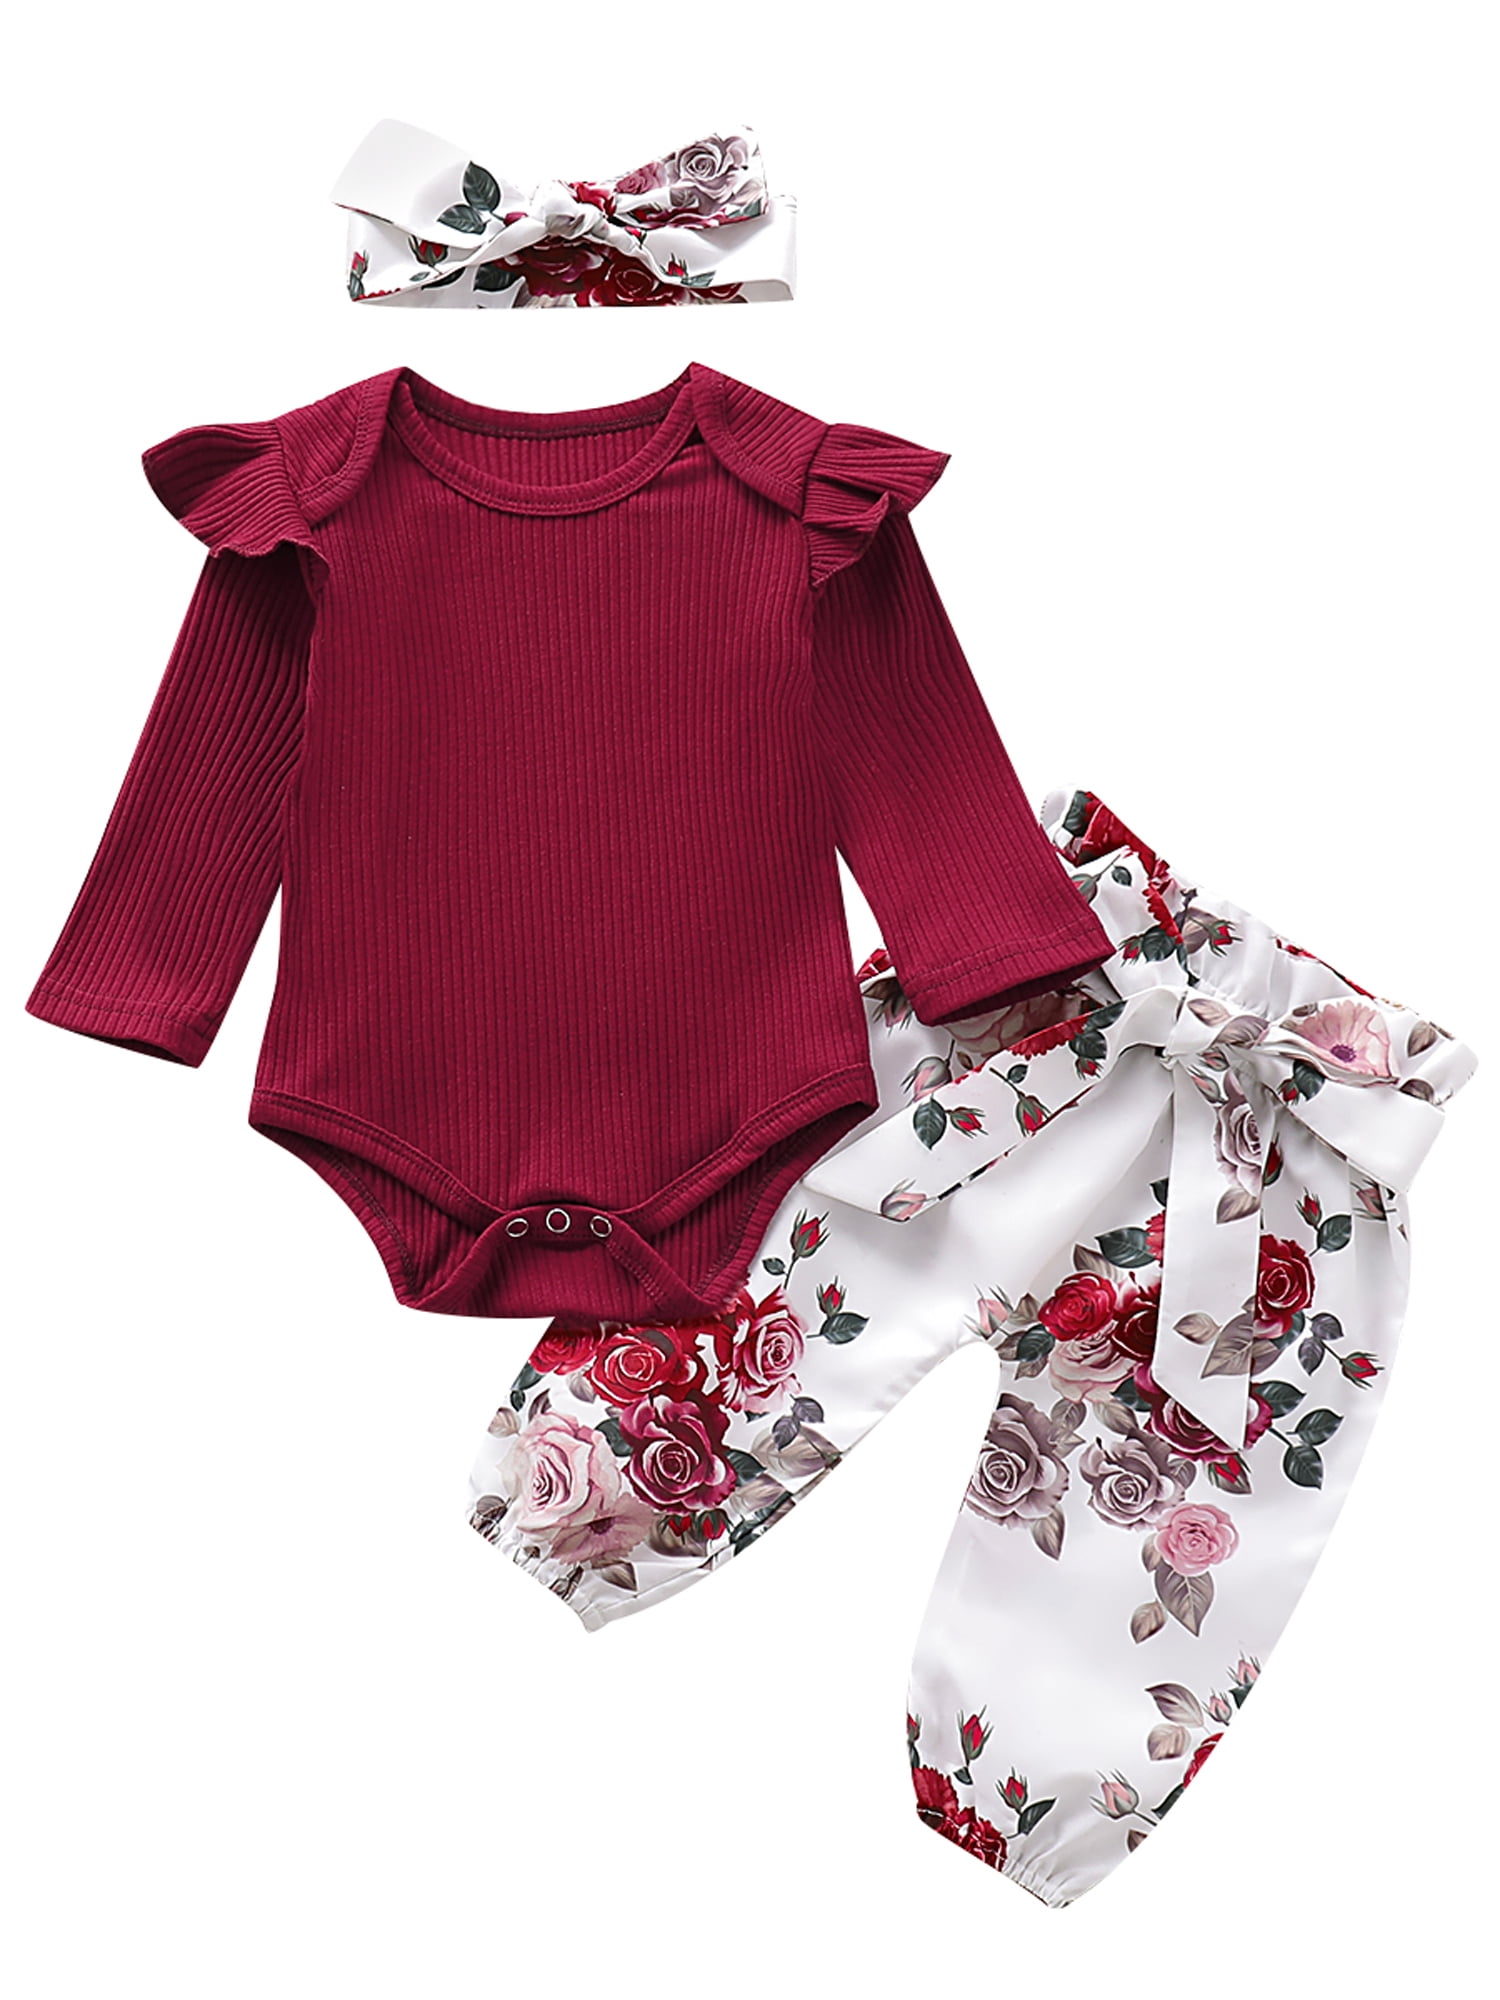 Infant Baby Girls Romper Tops Jumpsuit Floral Pants Headband Clothes Outfits Set 